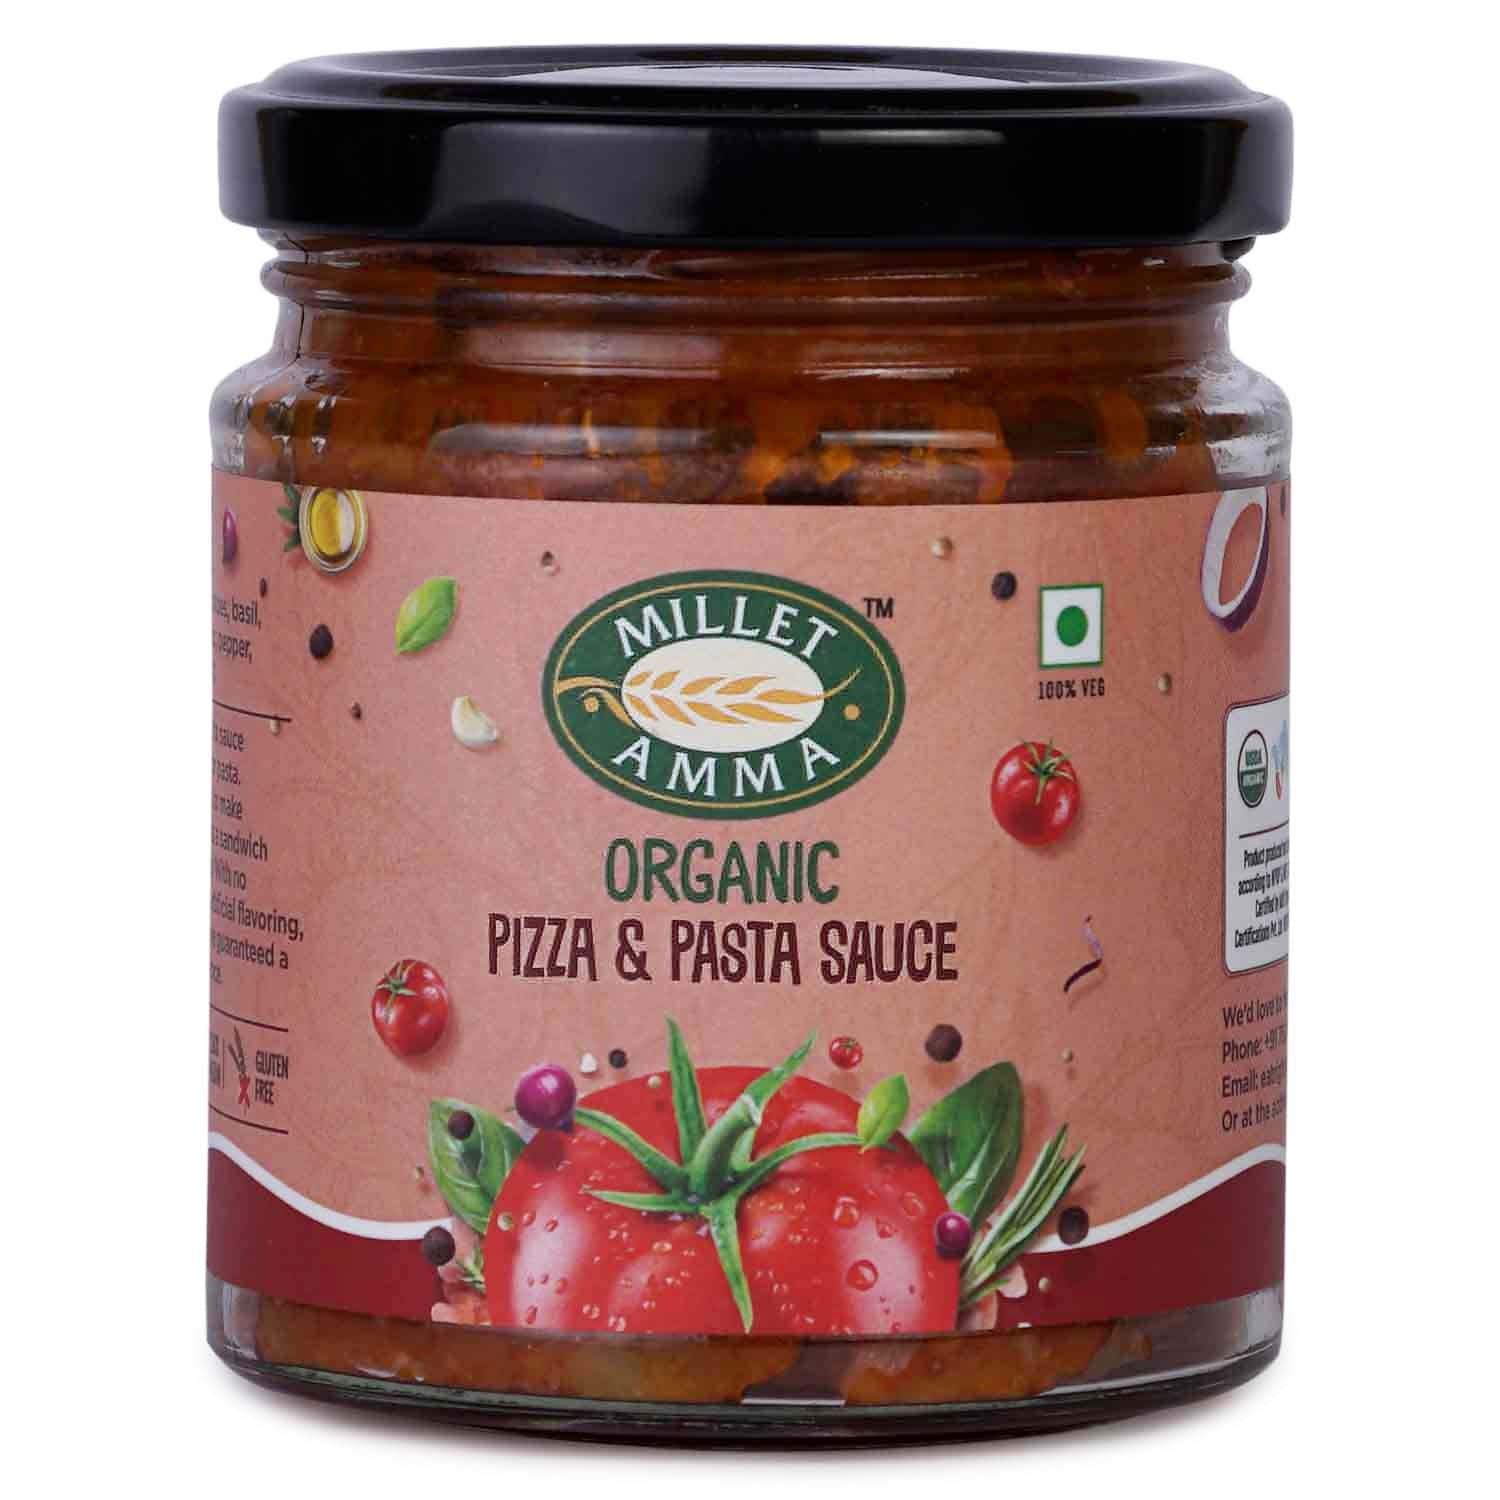 Millet Amma’s Pizza Pasta Sauce- A delicious Organic Pizza and Pasta Sauce that gives your dish a delicious Italian taste.  Made from Tomatoes, Spices and Capsicum this sauce has a great balance of flavors and a chunky spreadable consistenc